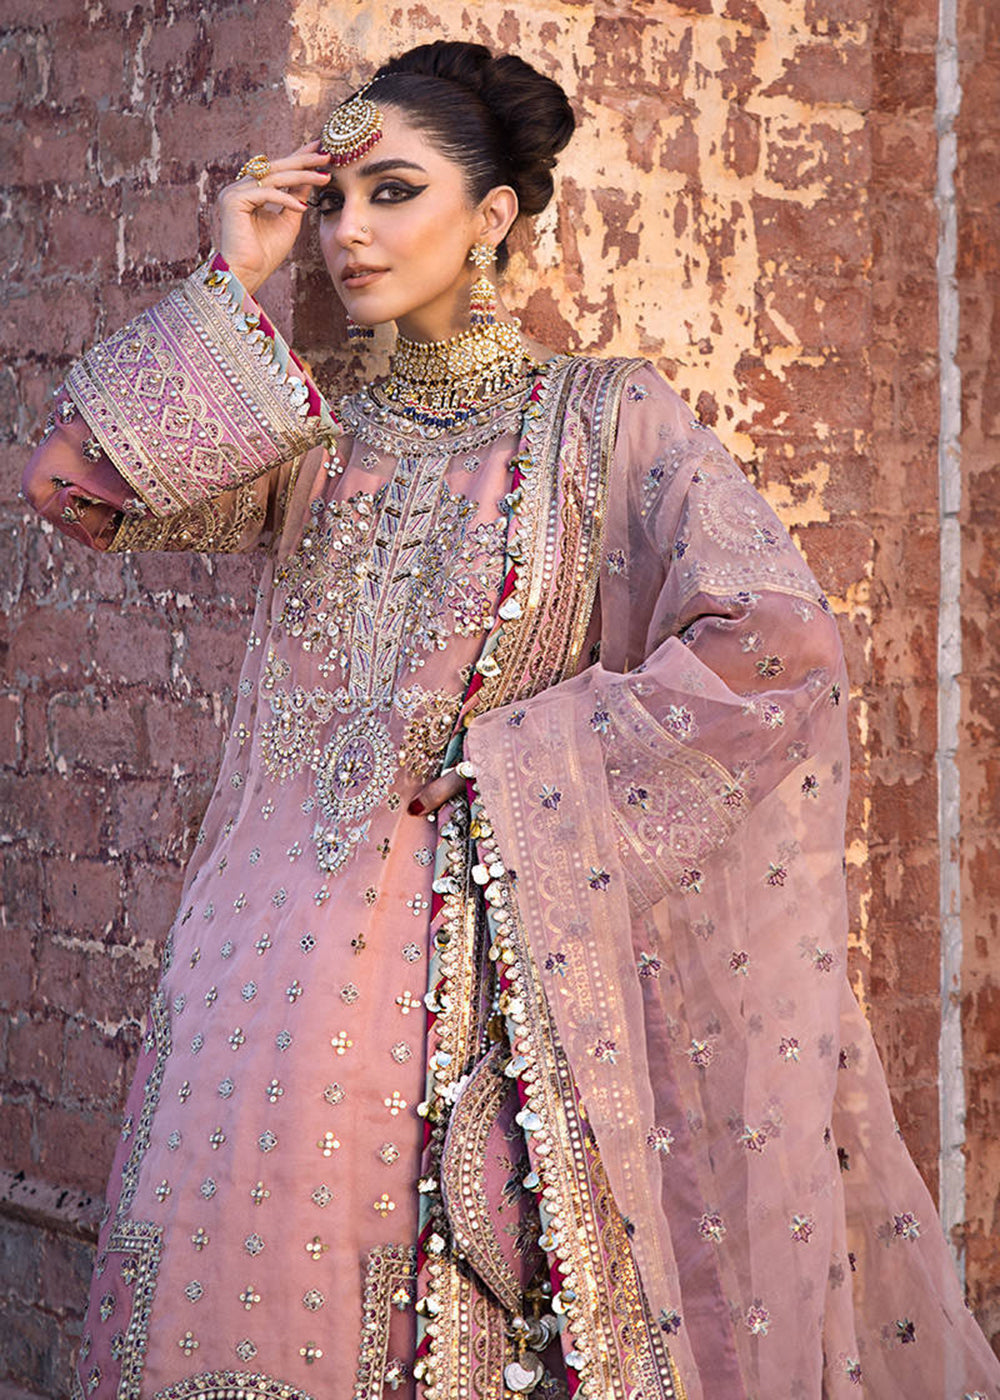 Buy Now Talpur Dynasty '23 - Unstitched Festive Vol. IV by MNR - AARZOO Online at Empress Online in USA, UK, Canada & Worldwide at Empress Clothing. 